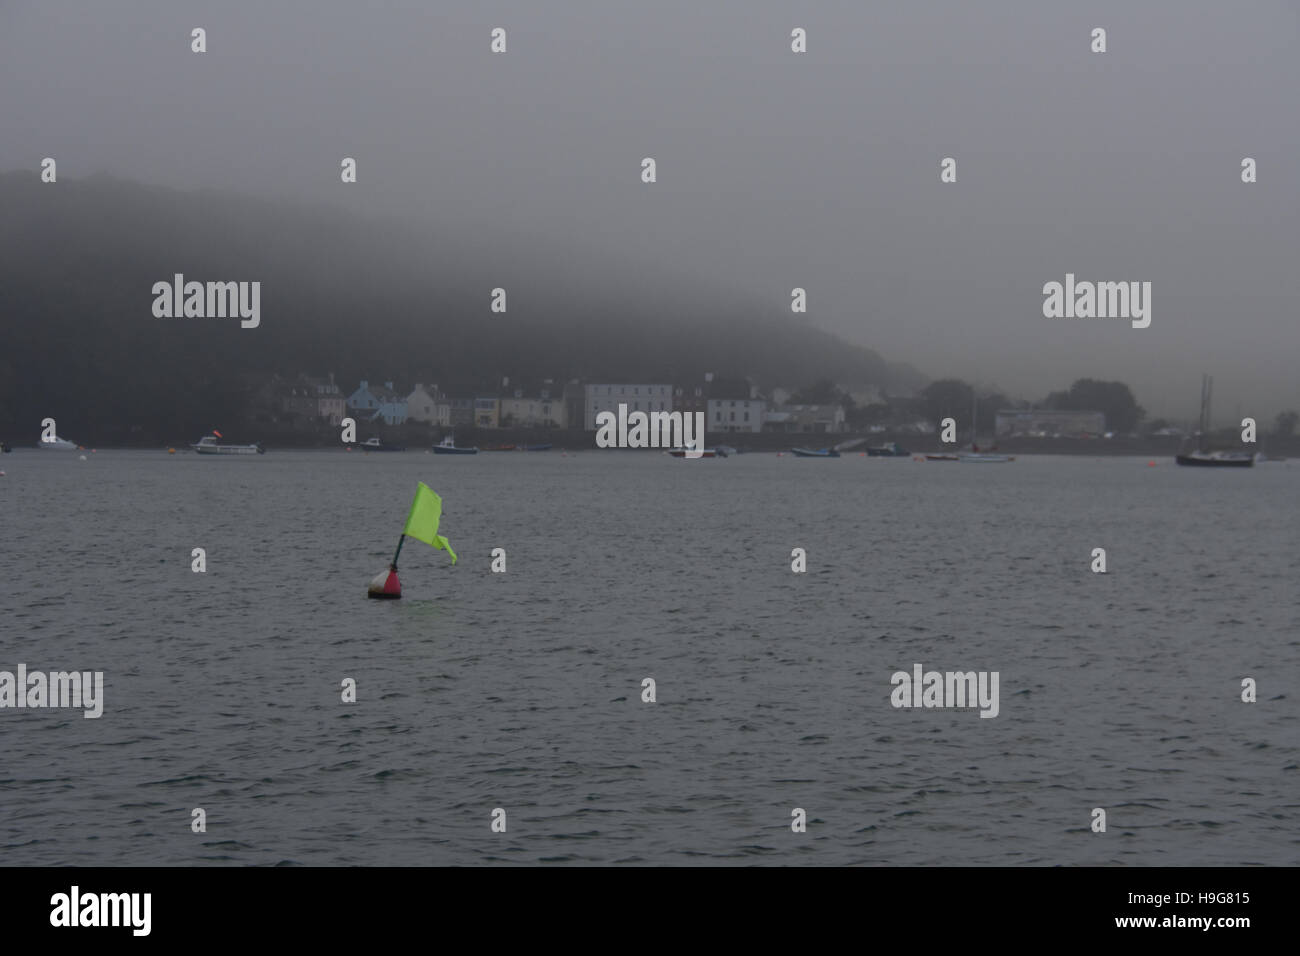 A racing marker flies in the wind as the mist rolls in at Dale reducing visibility on a calm autumn day Stock Photo